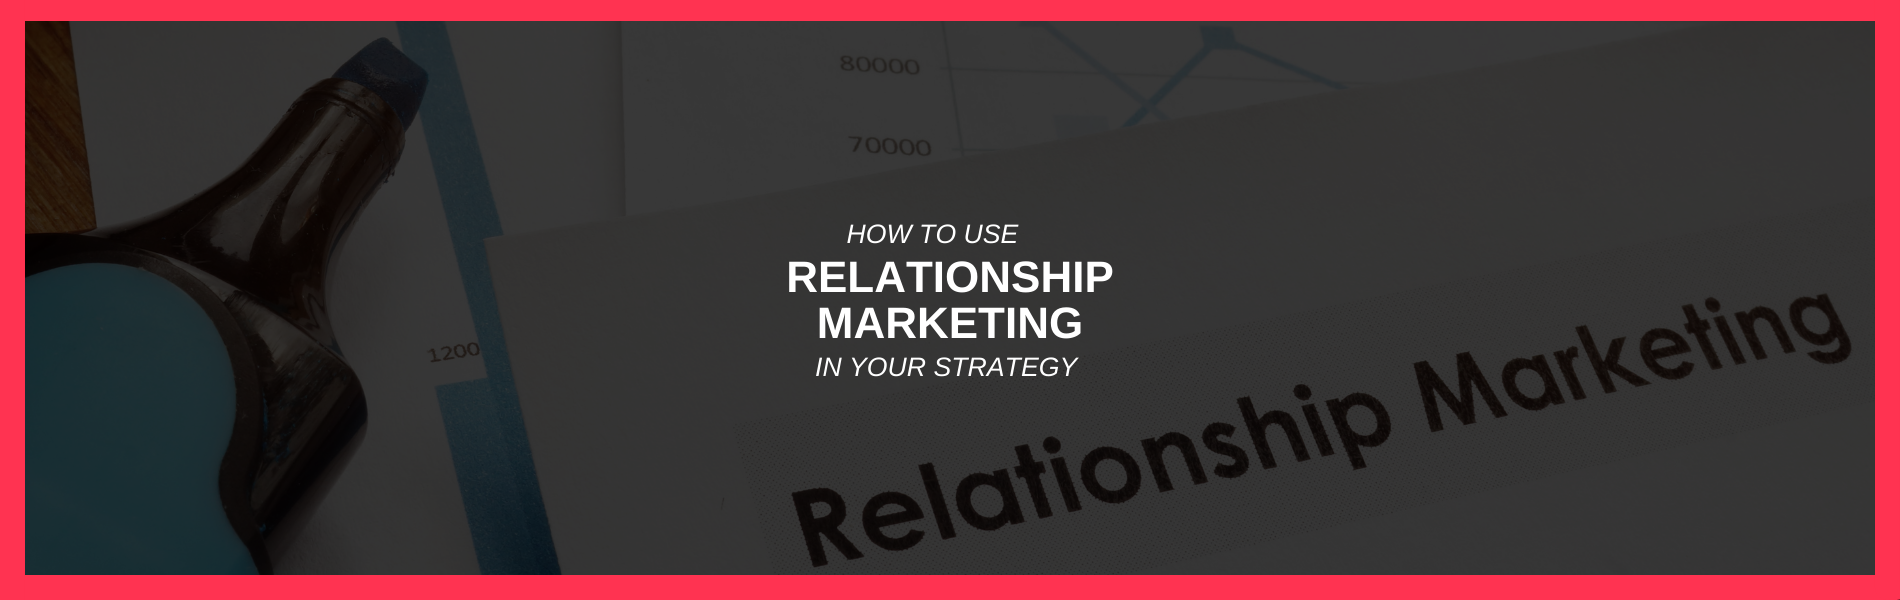 How to Use Relationship Marketing in Your Strategy